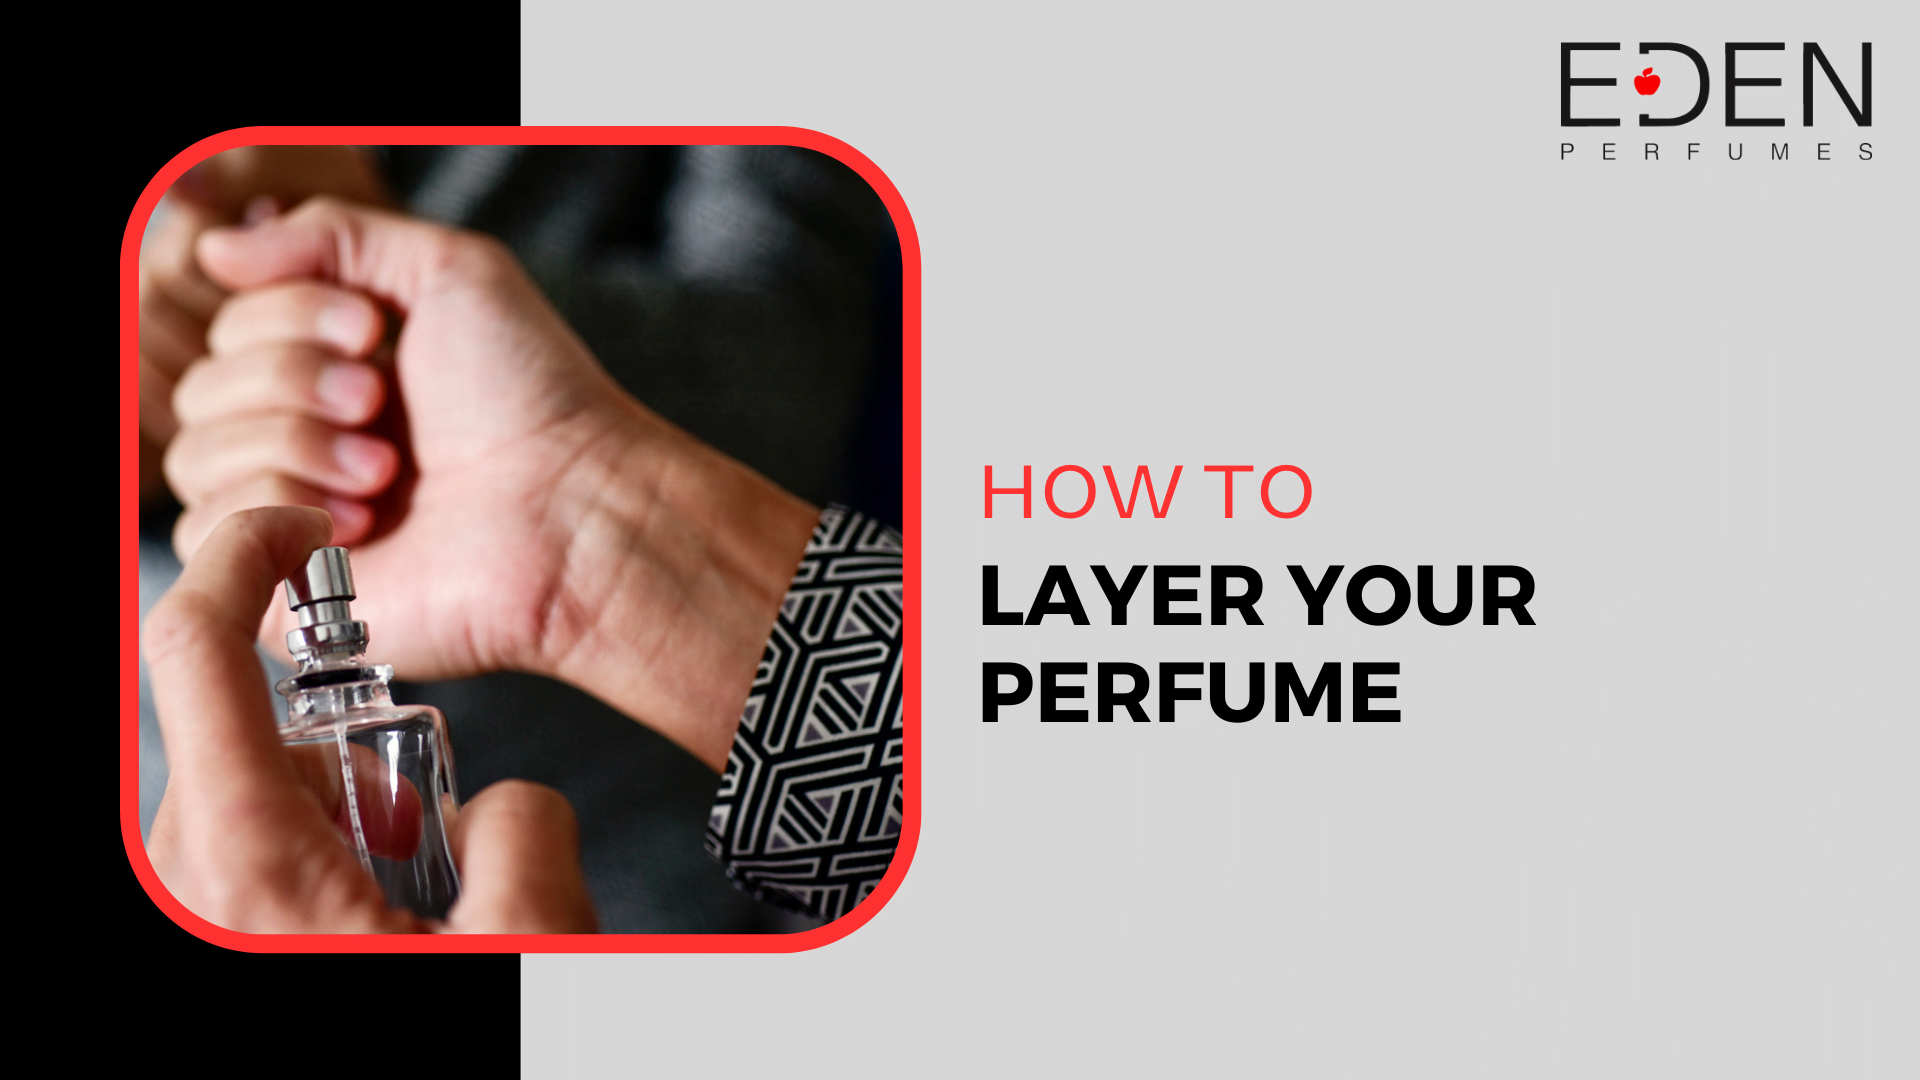 How to layer your perfume